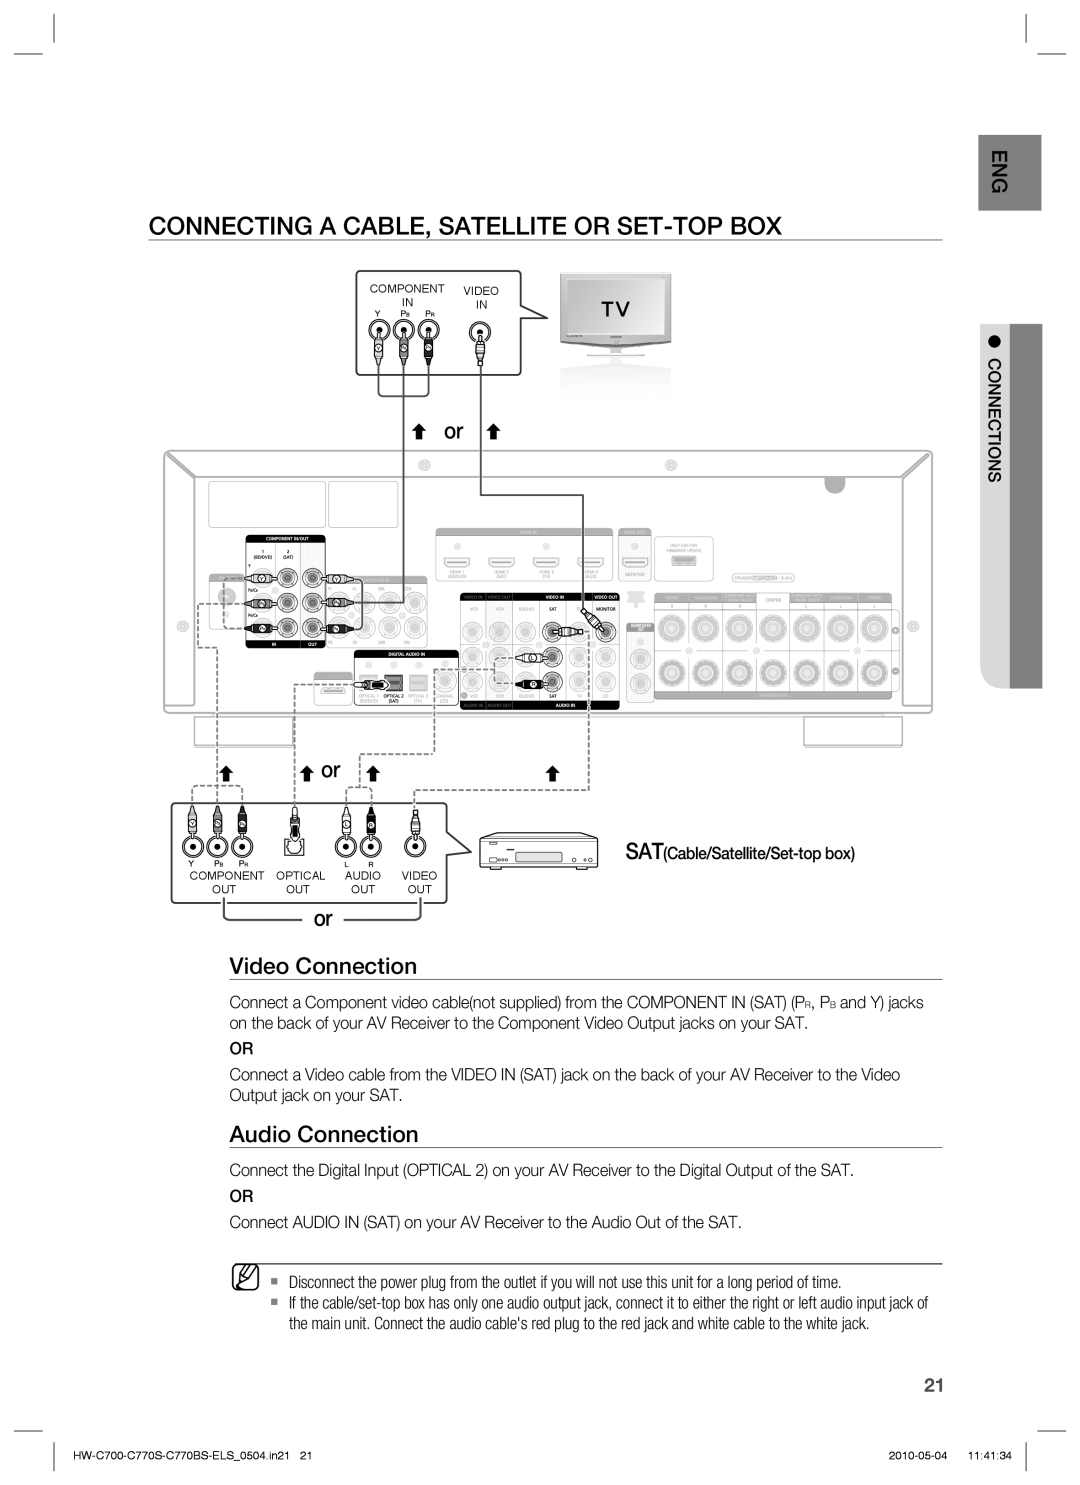 Samsung HW-C700/EDC manual Connecting A Cable, Satellite Or Set-Top Box, or or, or Video Connection, Audio Connection 